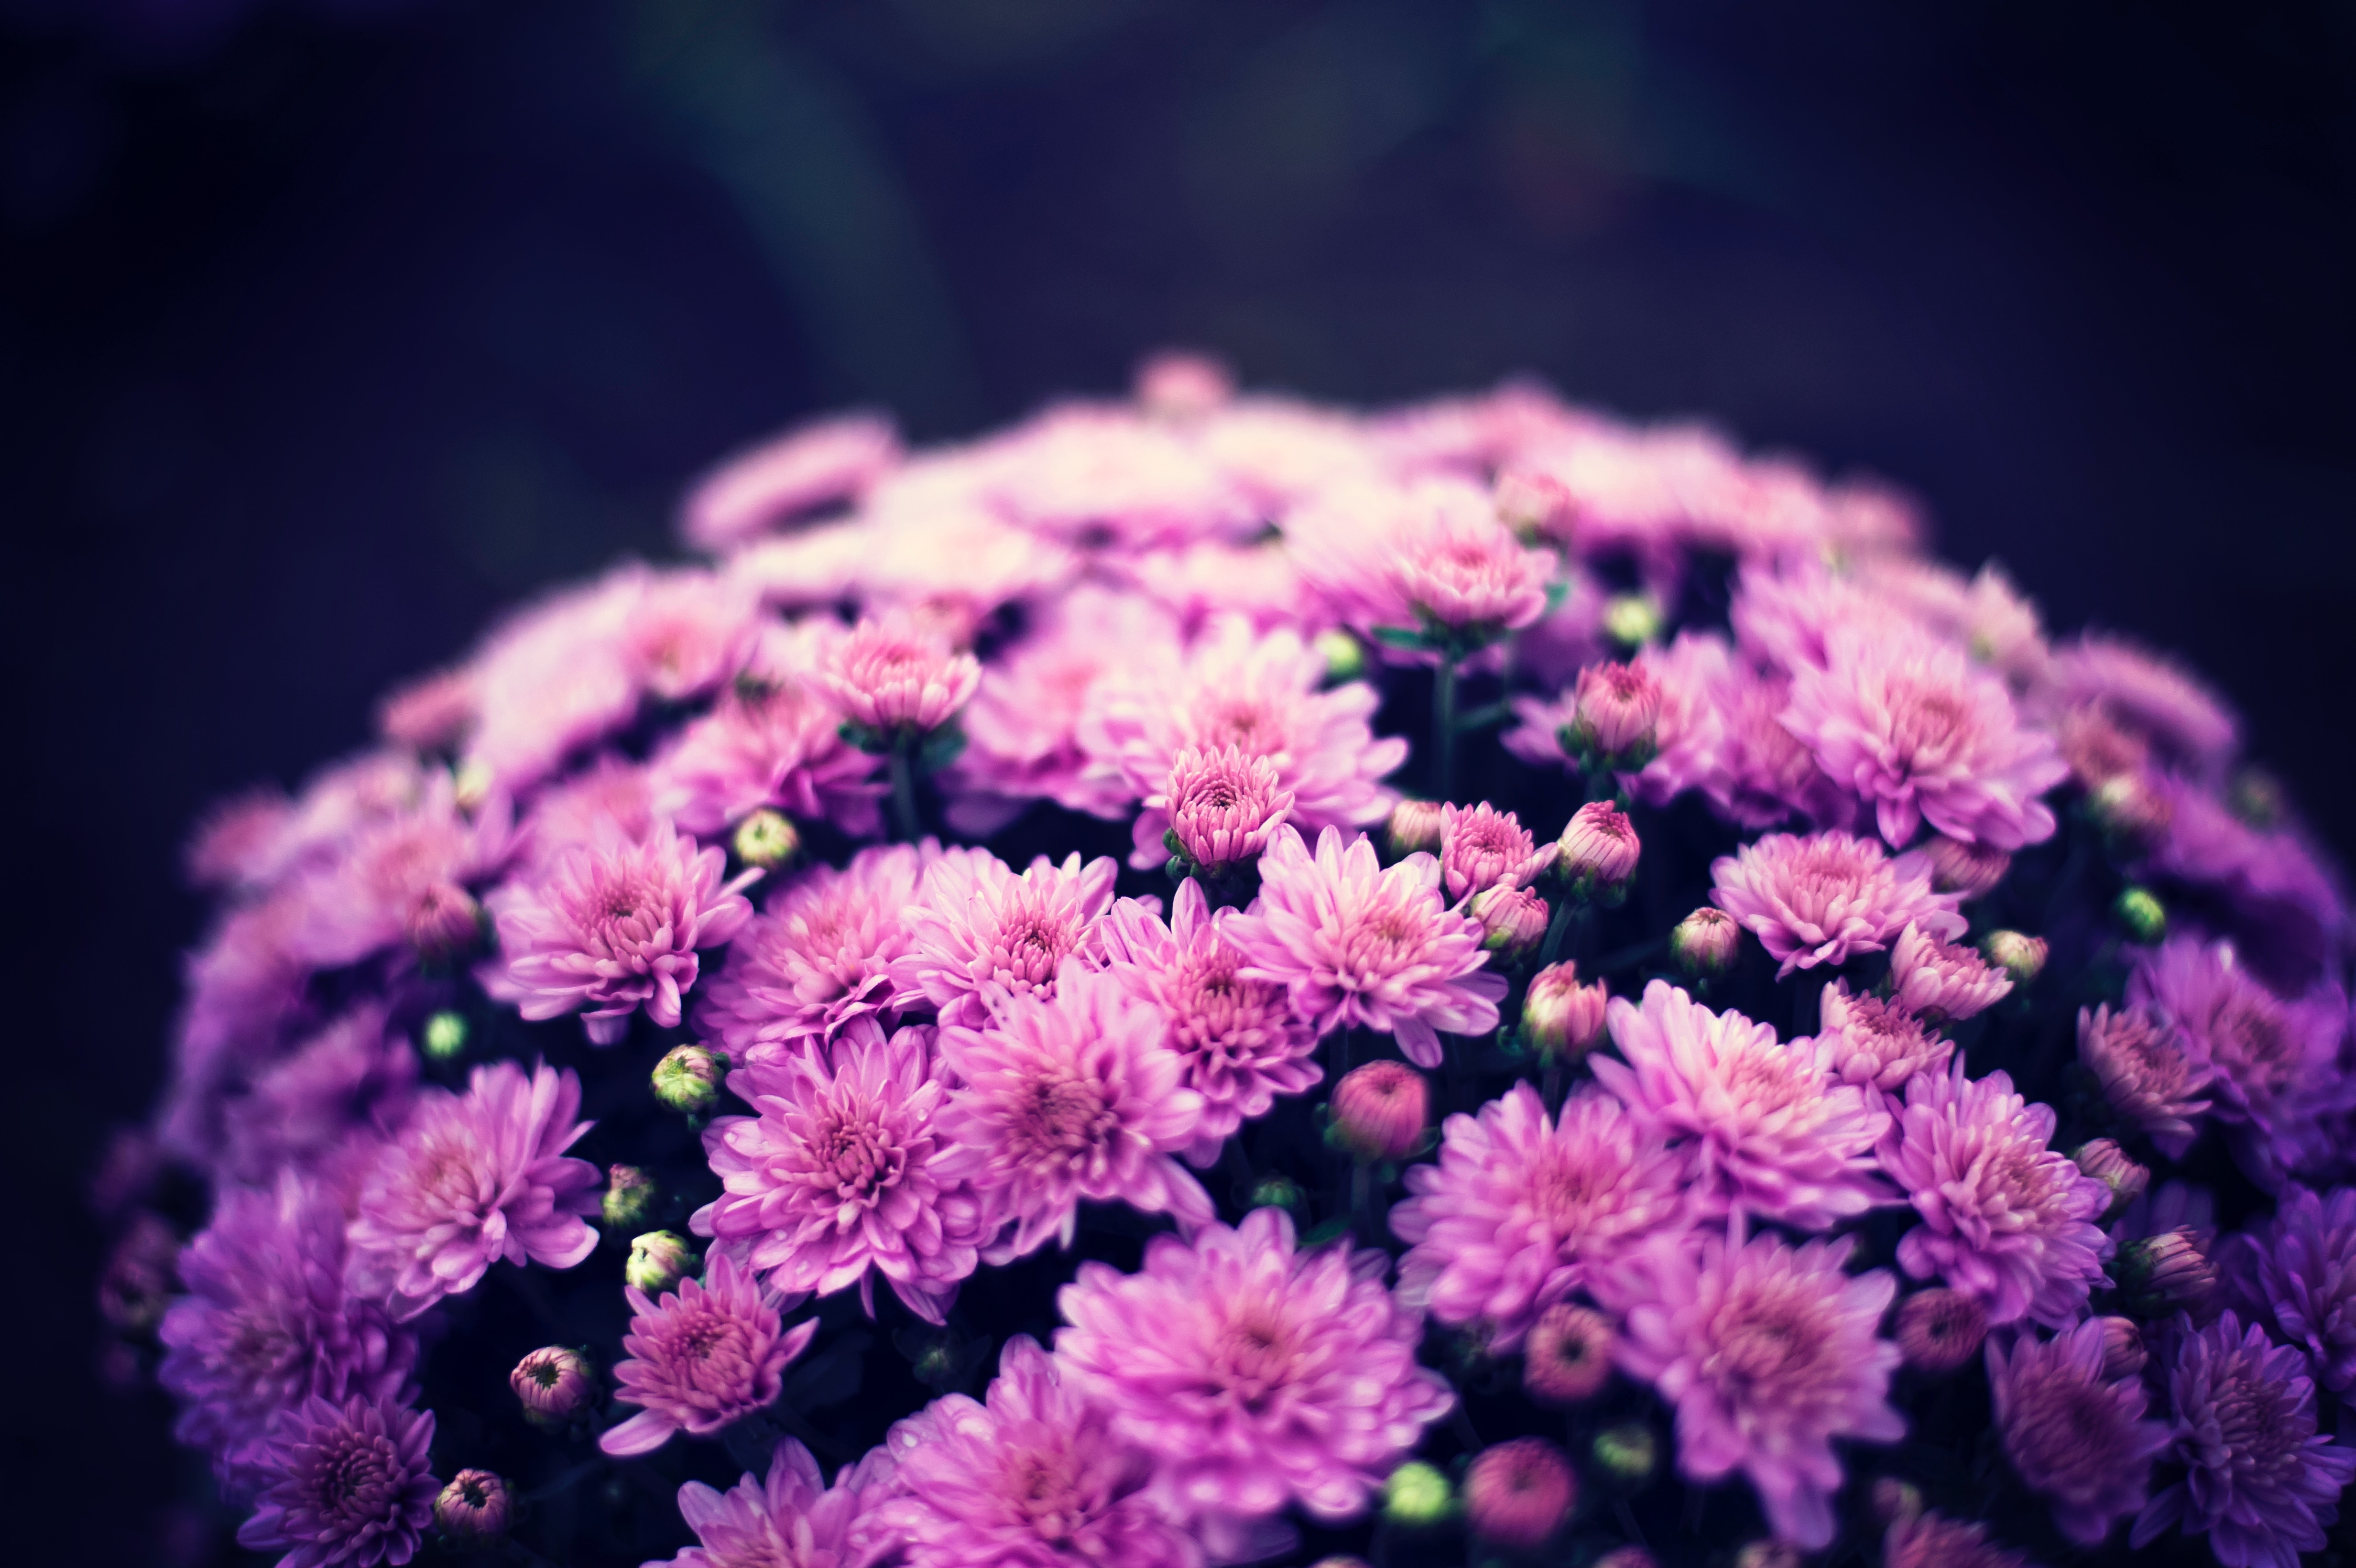 A bouquet of pink chrysanthemums